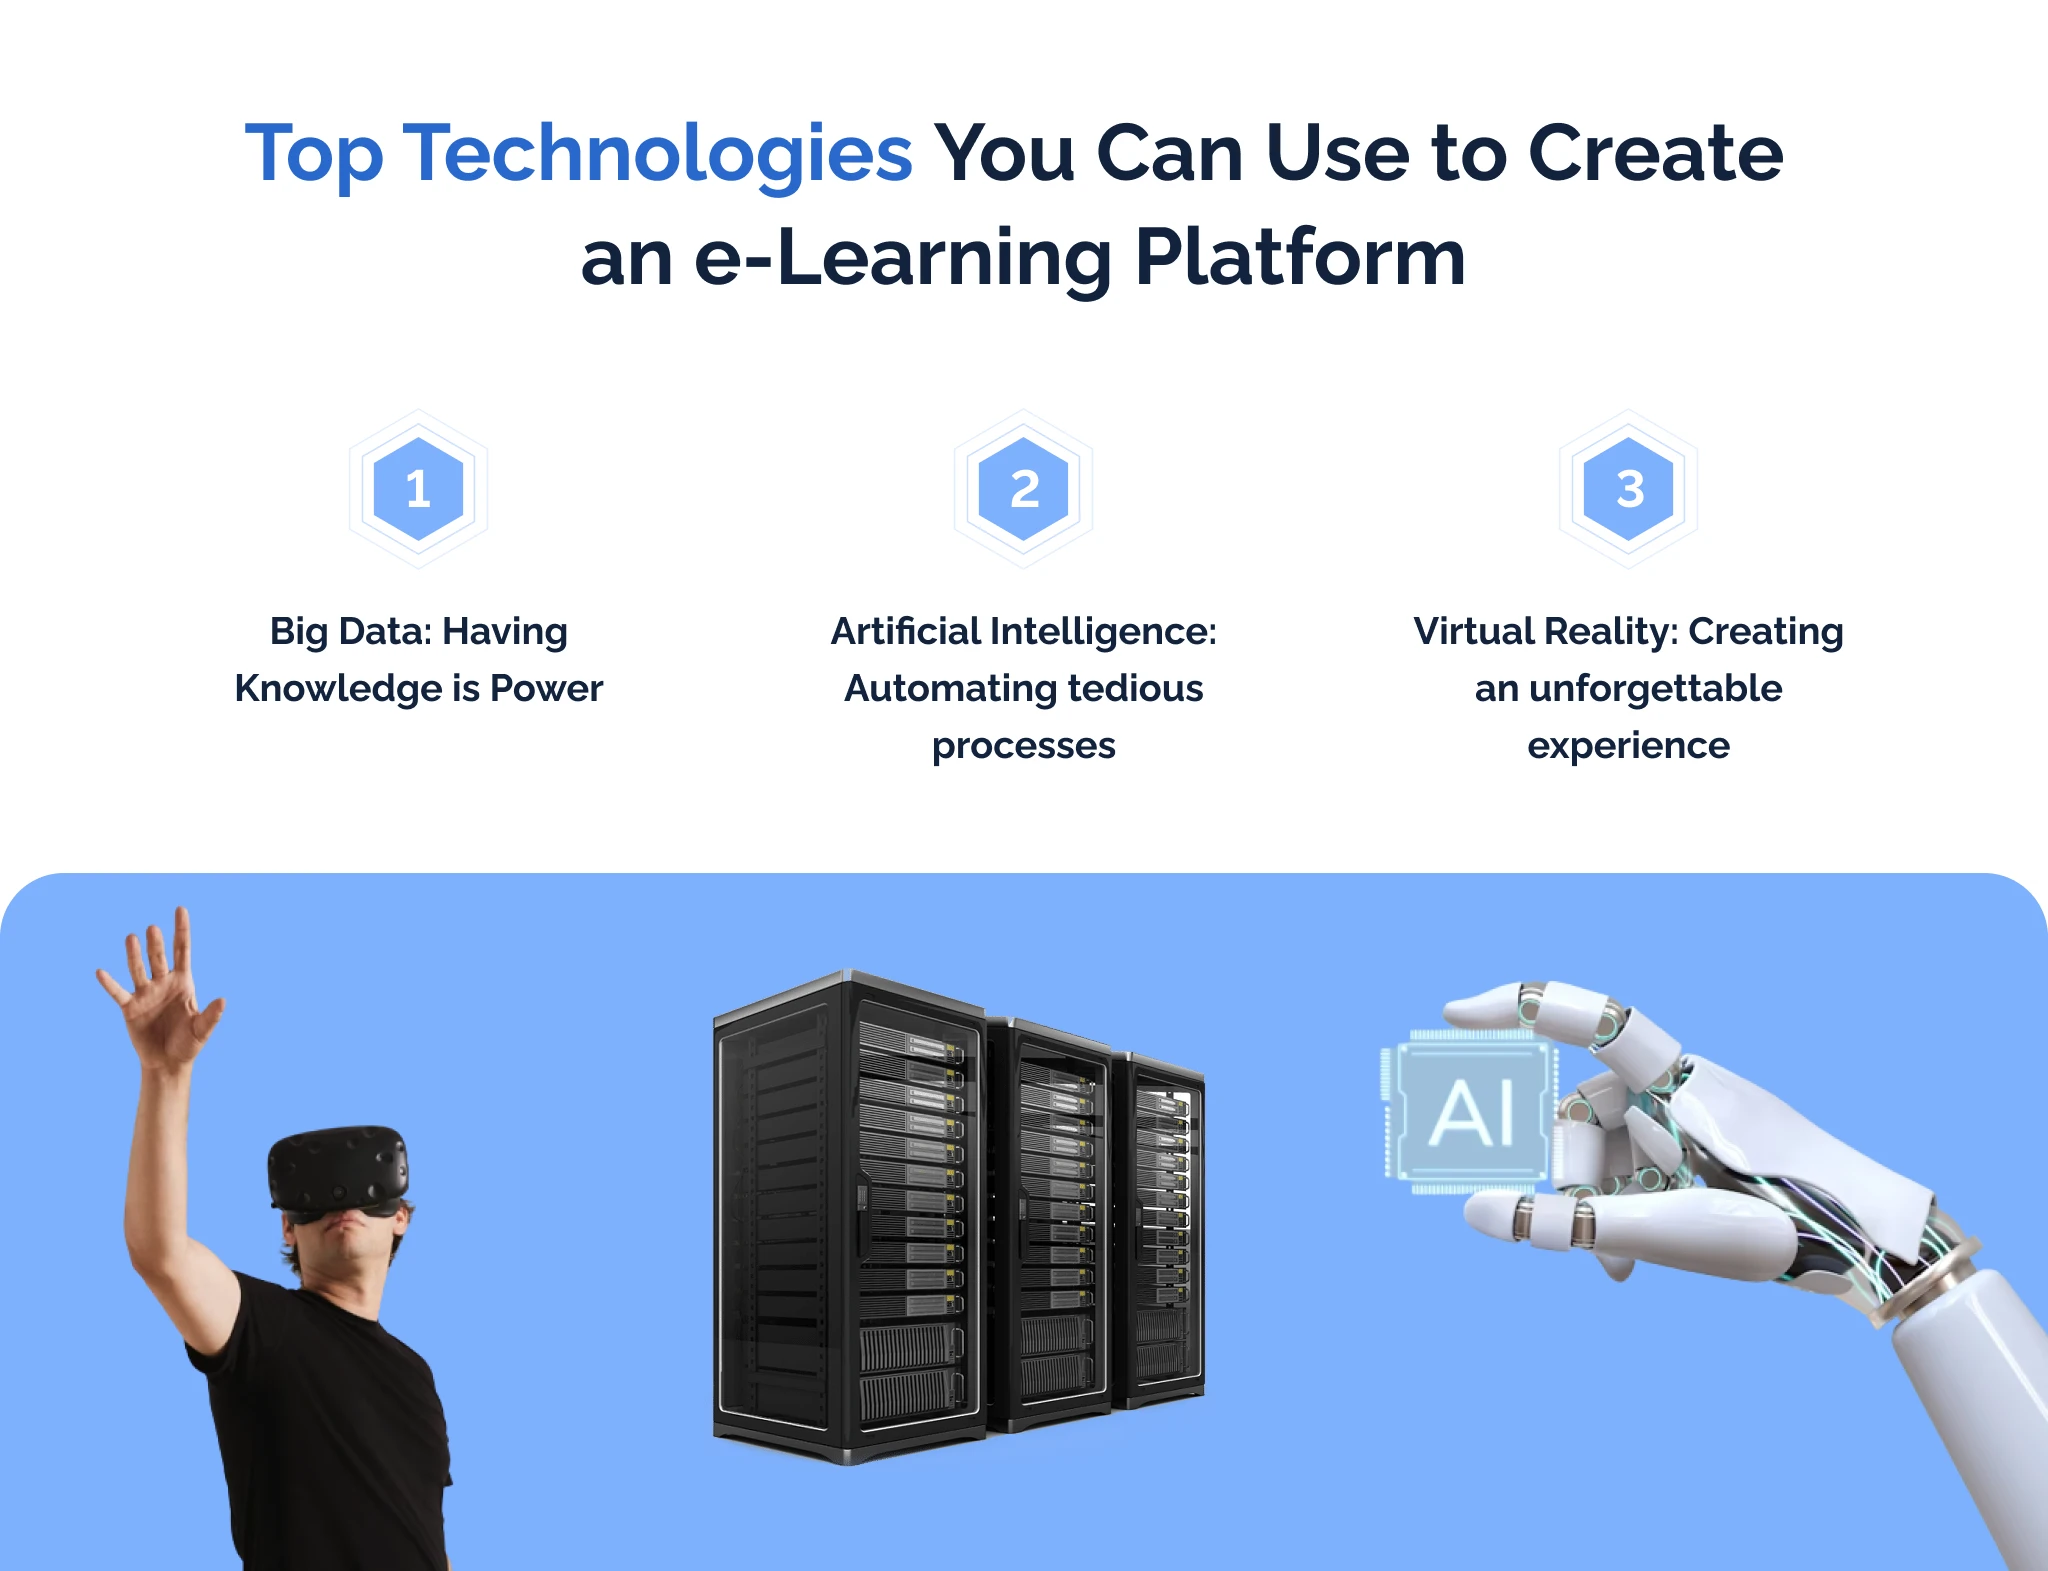 Top technologies you can use to create an e-learning platform